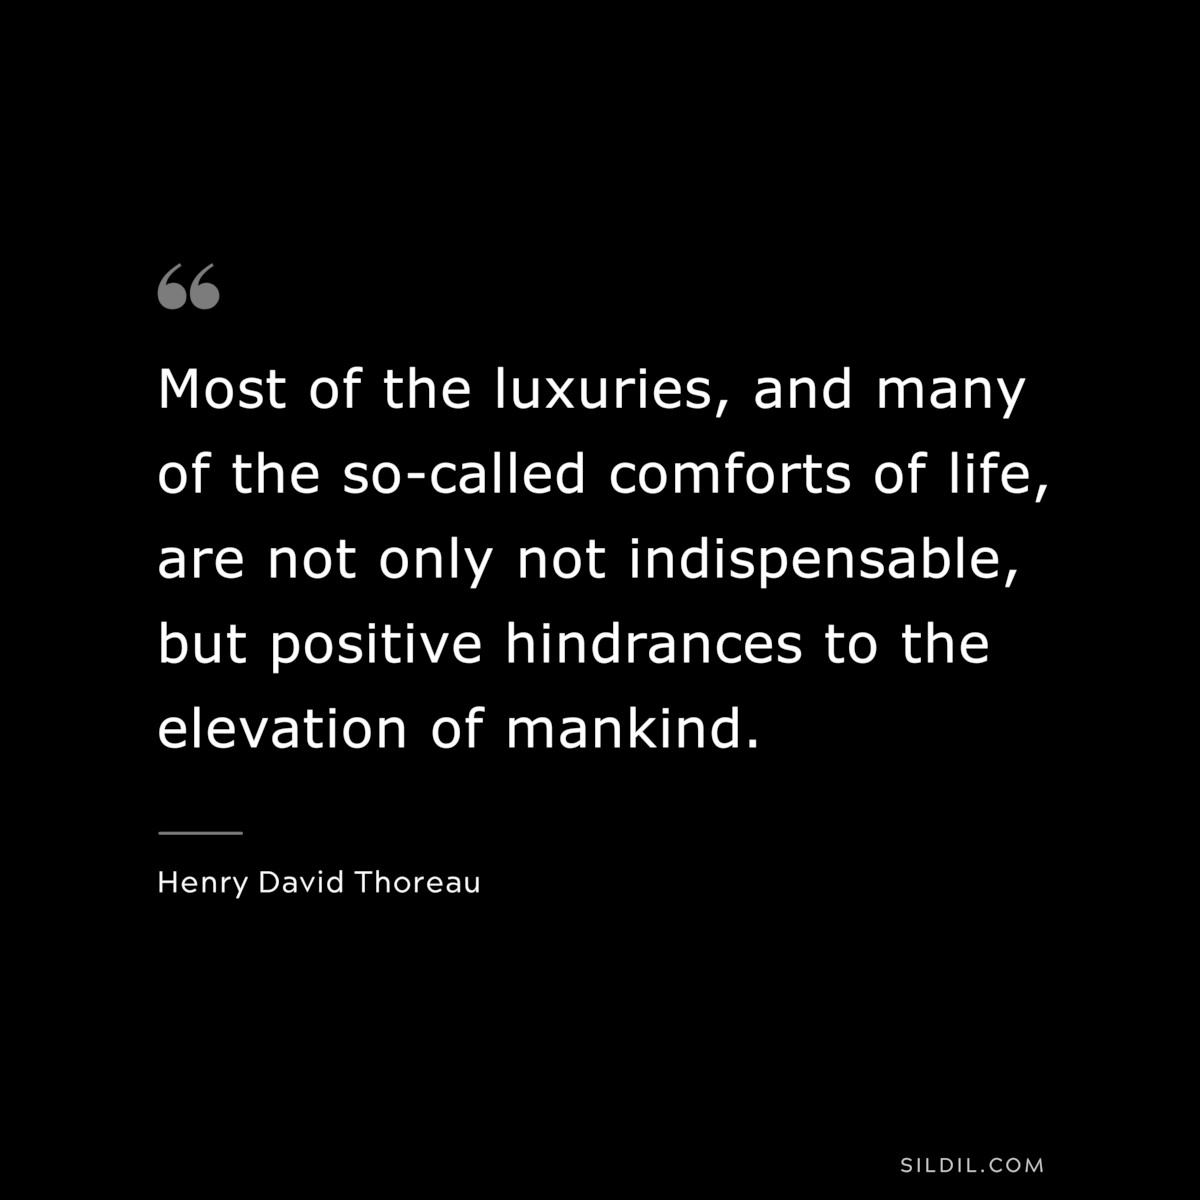 Most of the luxuries, and many of the so-called comforts of life, are not only not indispensable, but positive hindrances to the elevation of mankind. — Henry David Thoreau